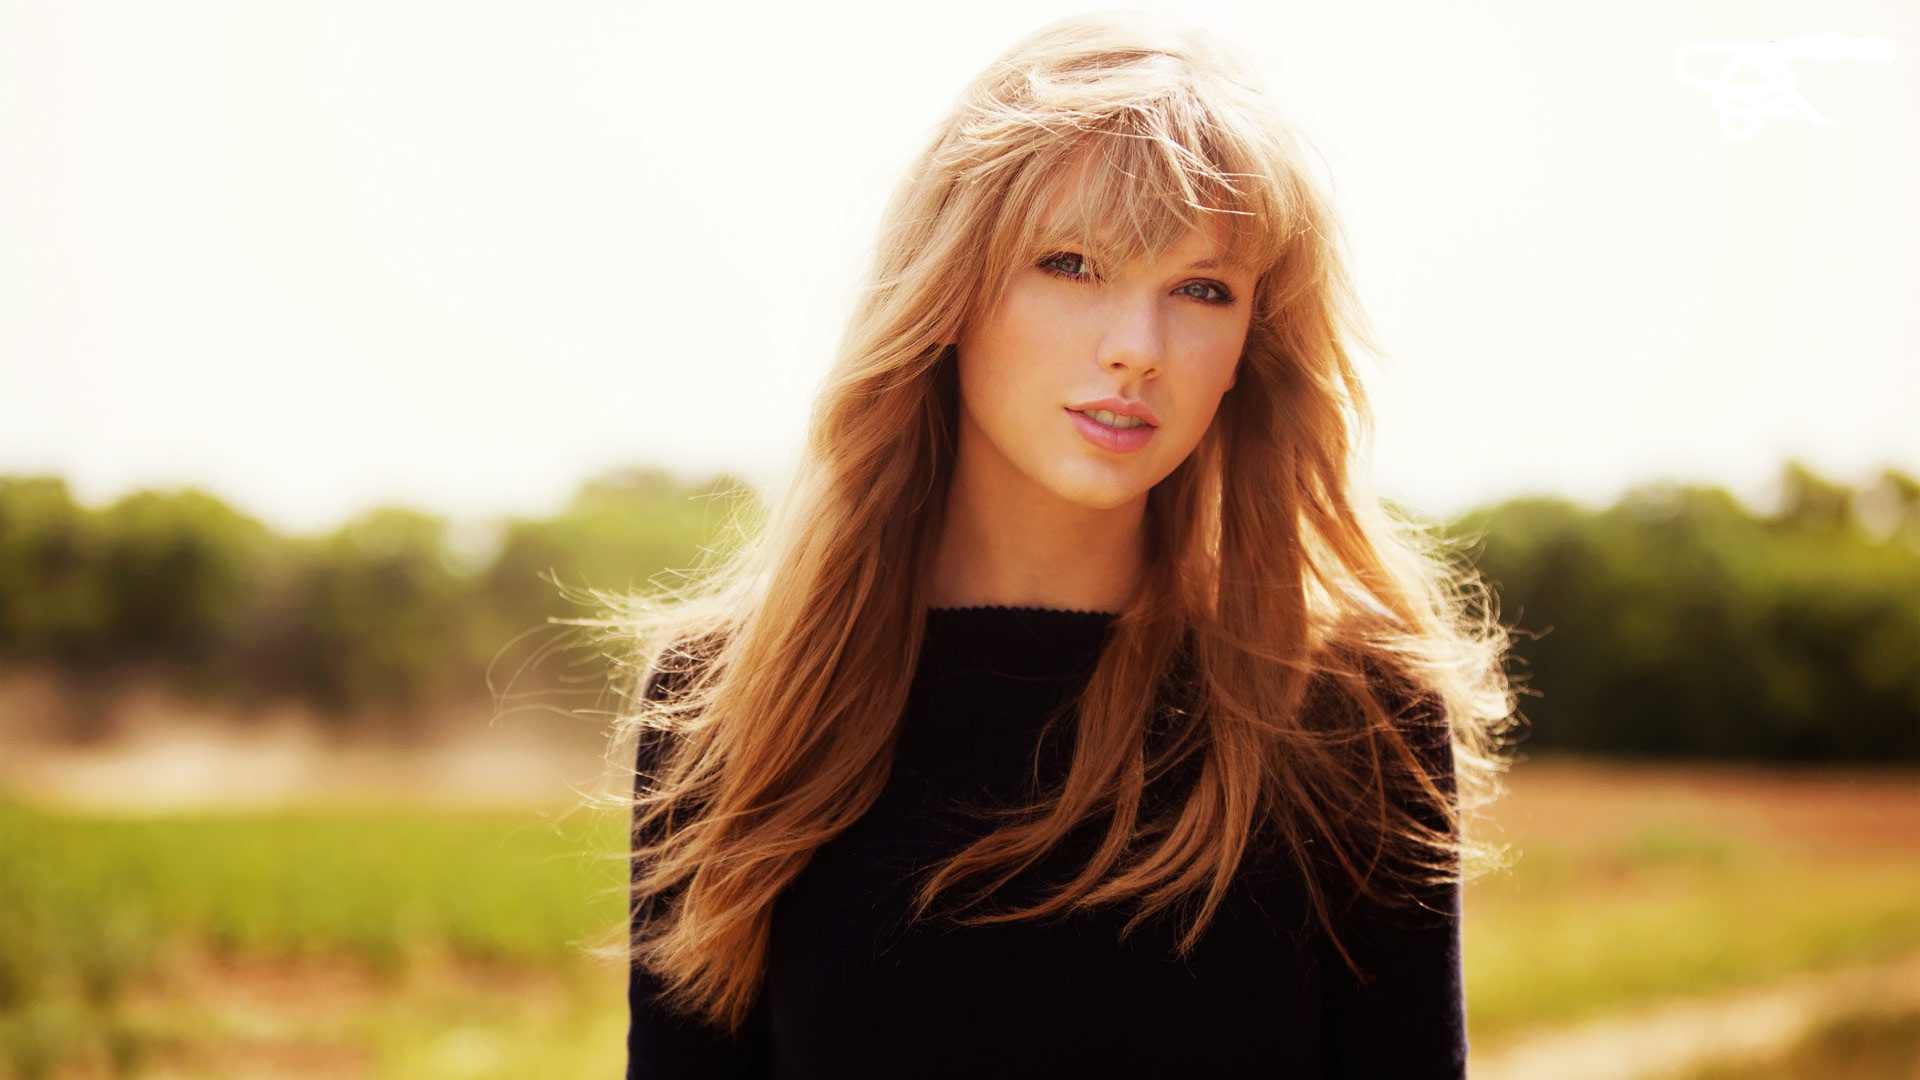 Taylor Swift 2013 HD Wallpaper « Android Wallpapers 2016